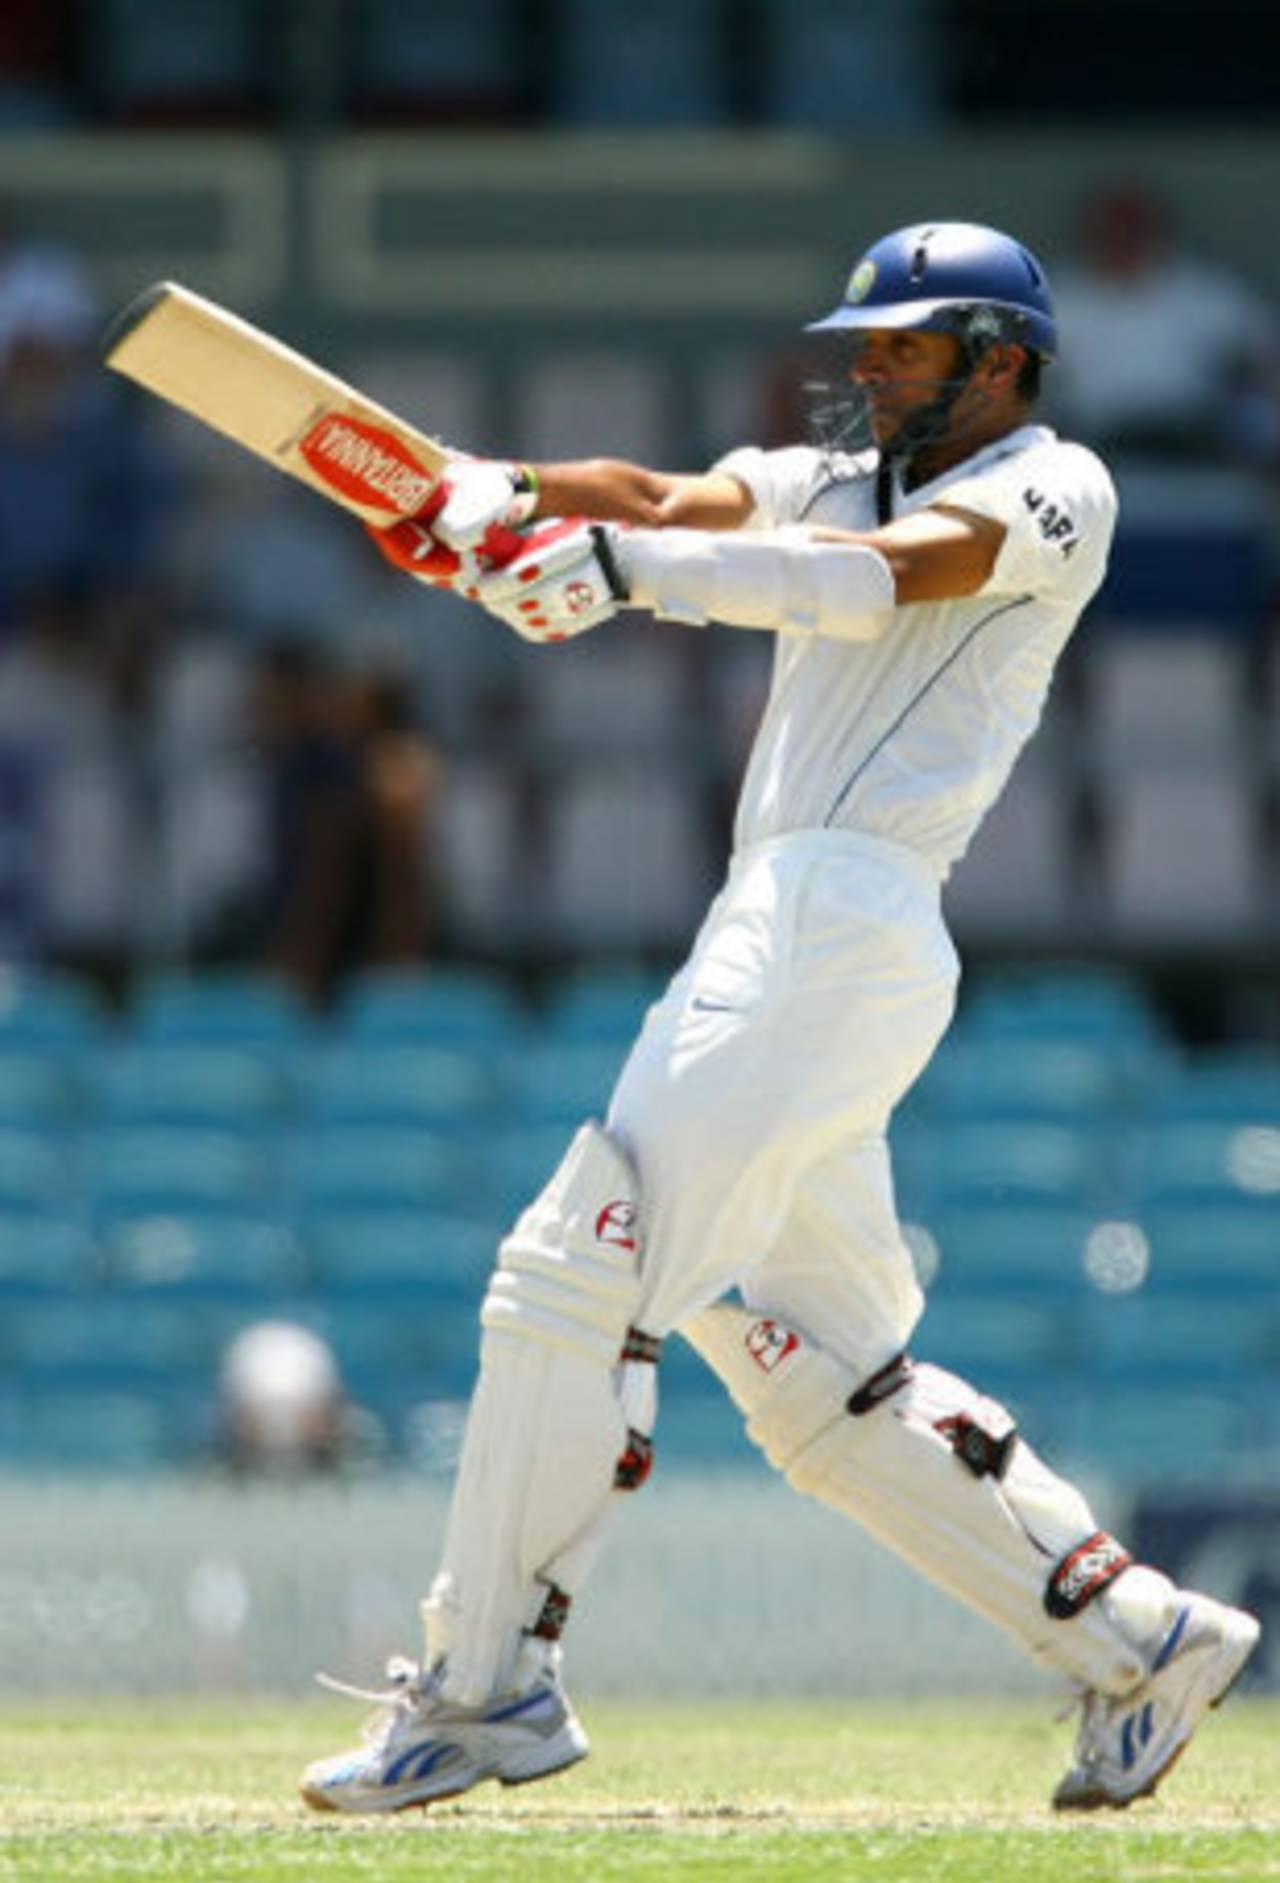 For a defensive batsman, Rahul Dravid is extraordinarily skilled at pulling the short ball&nbsp;&nbsp;&bull;&nbsp;&nbsp;Getty Images